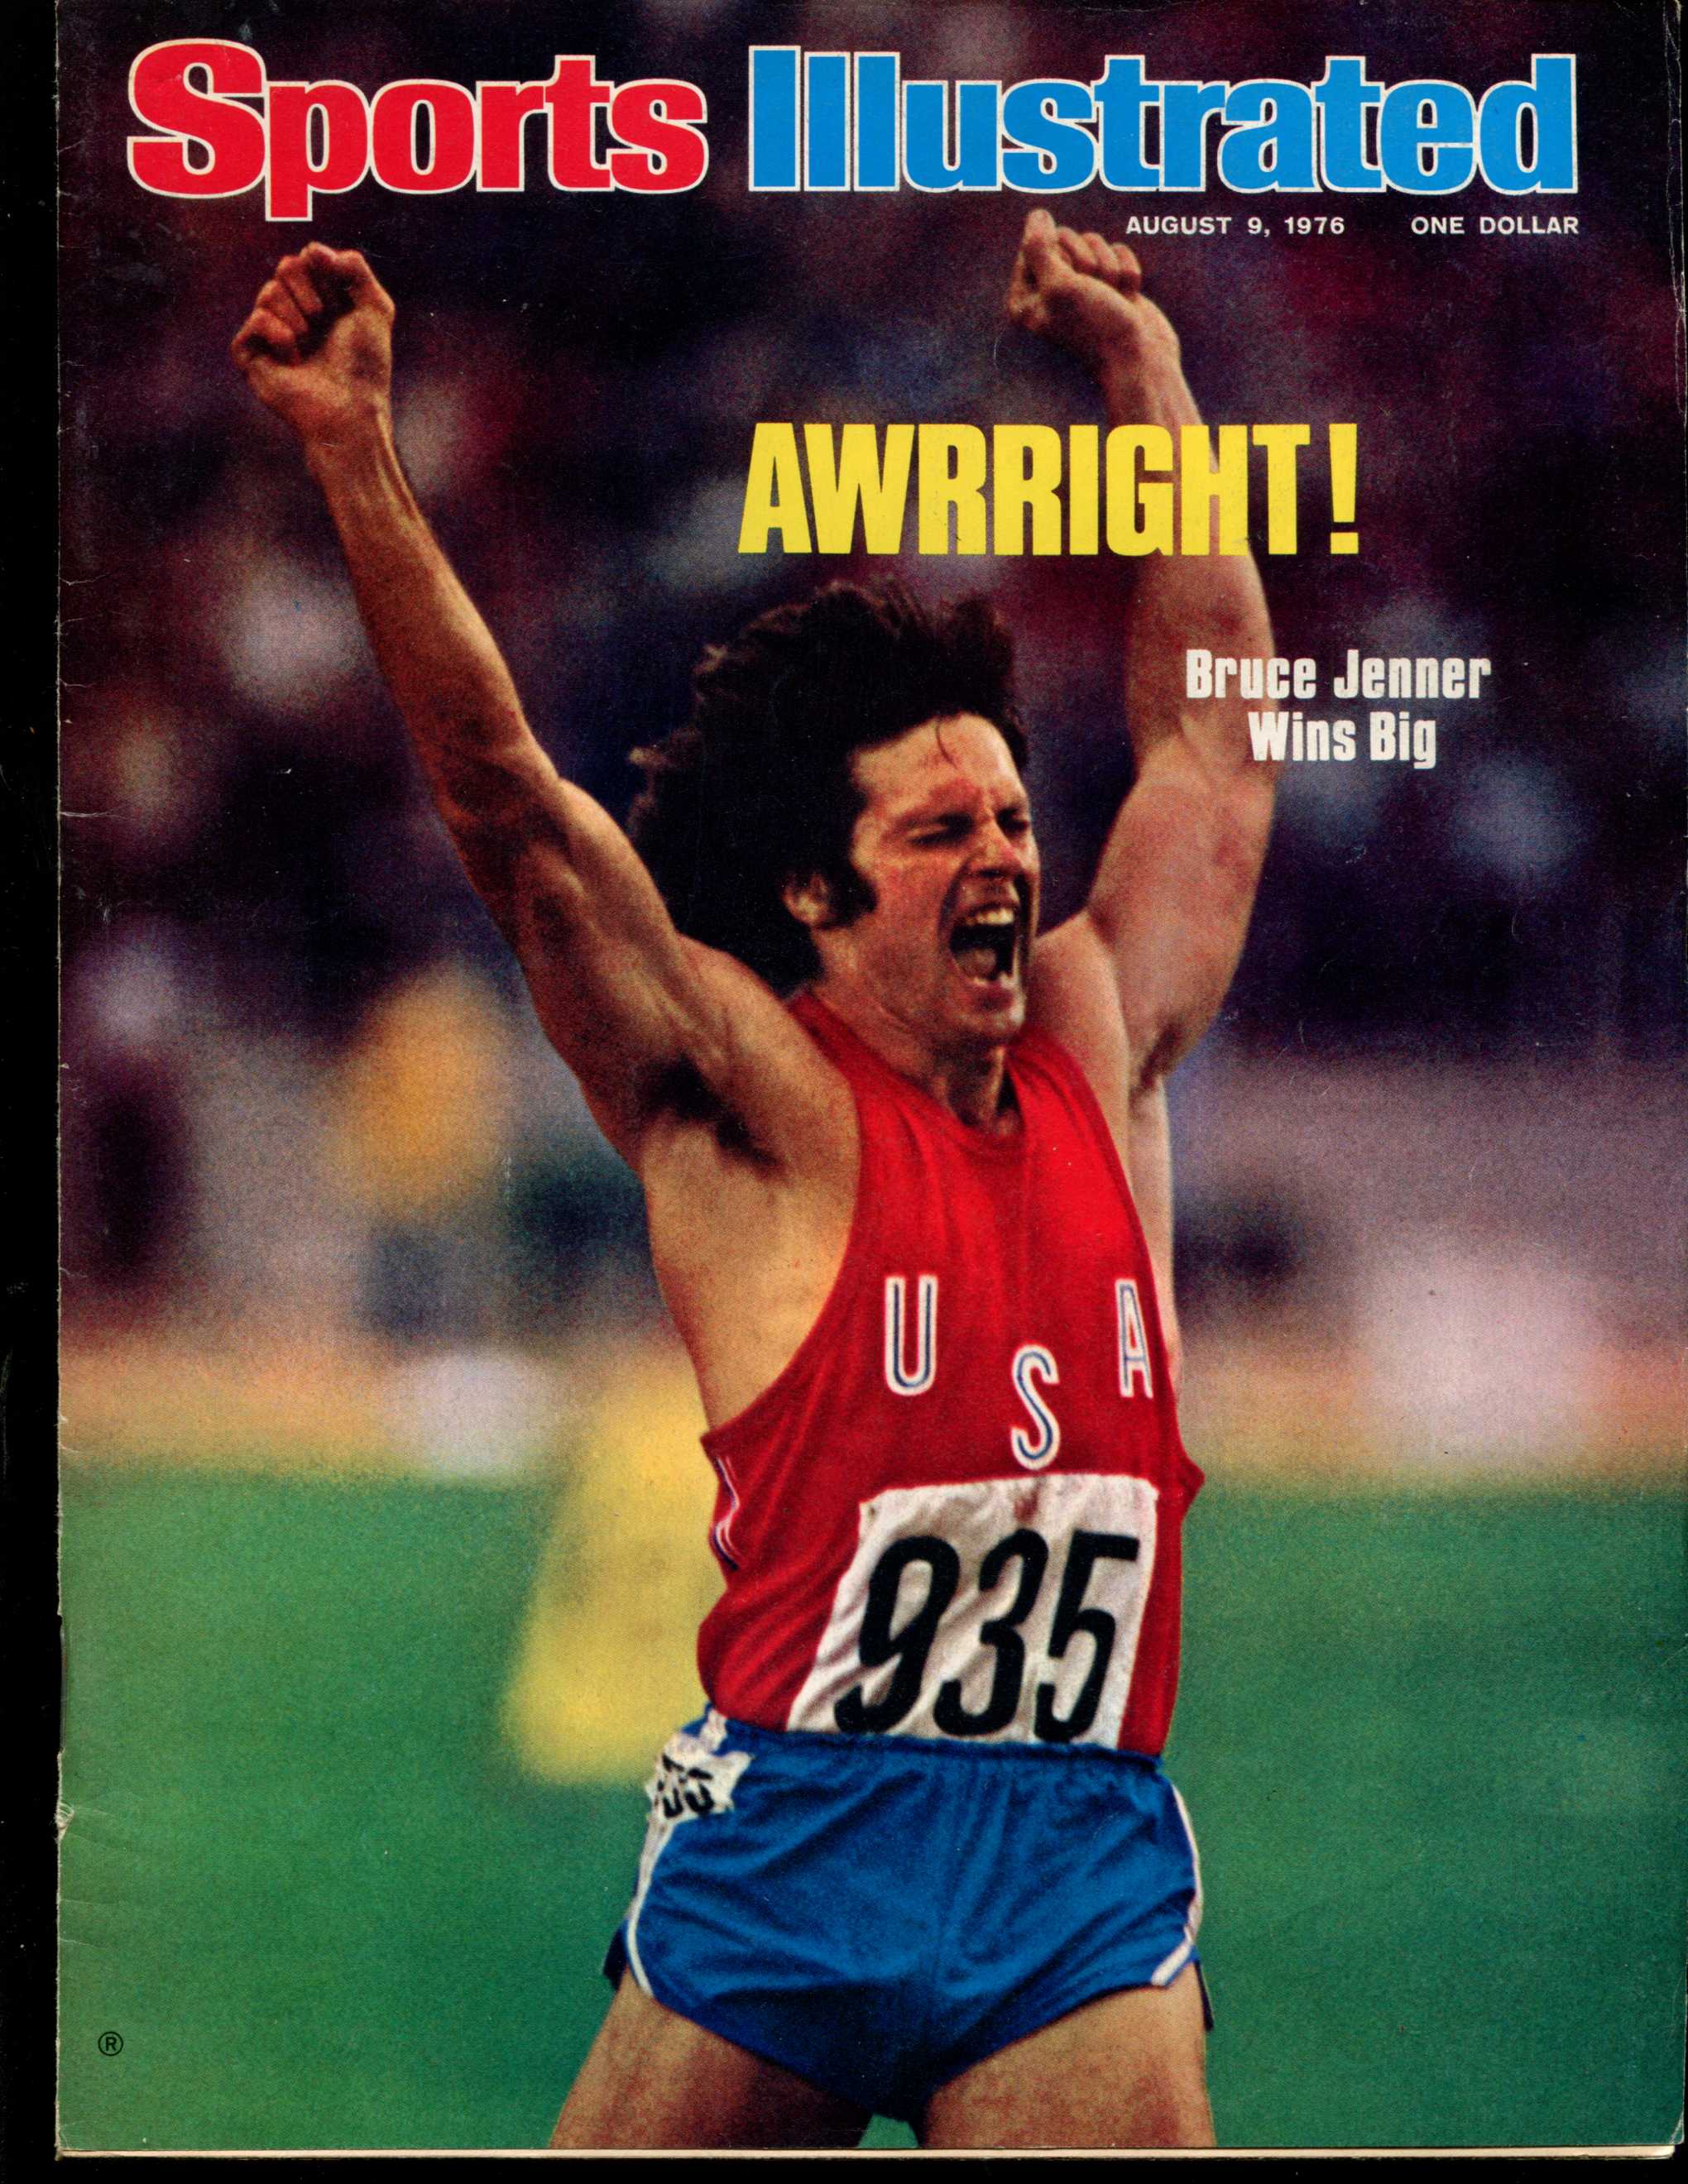 Sports Illustrated (1976/08/09) - Bruce Jenner cover (Olympics) Baseball cards value